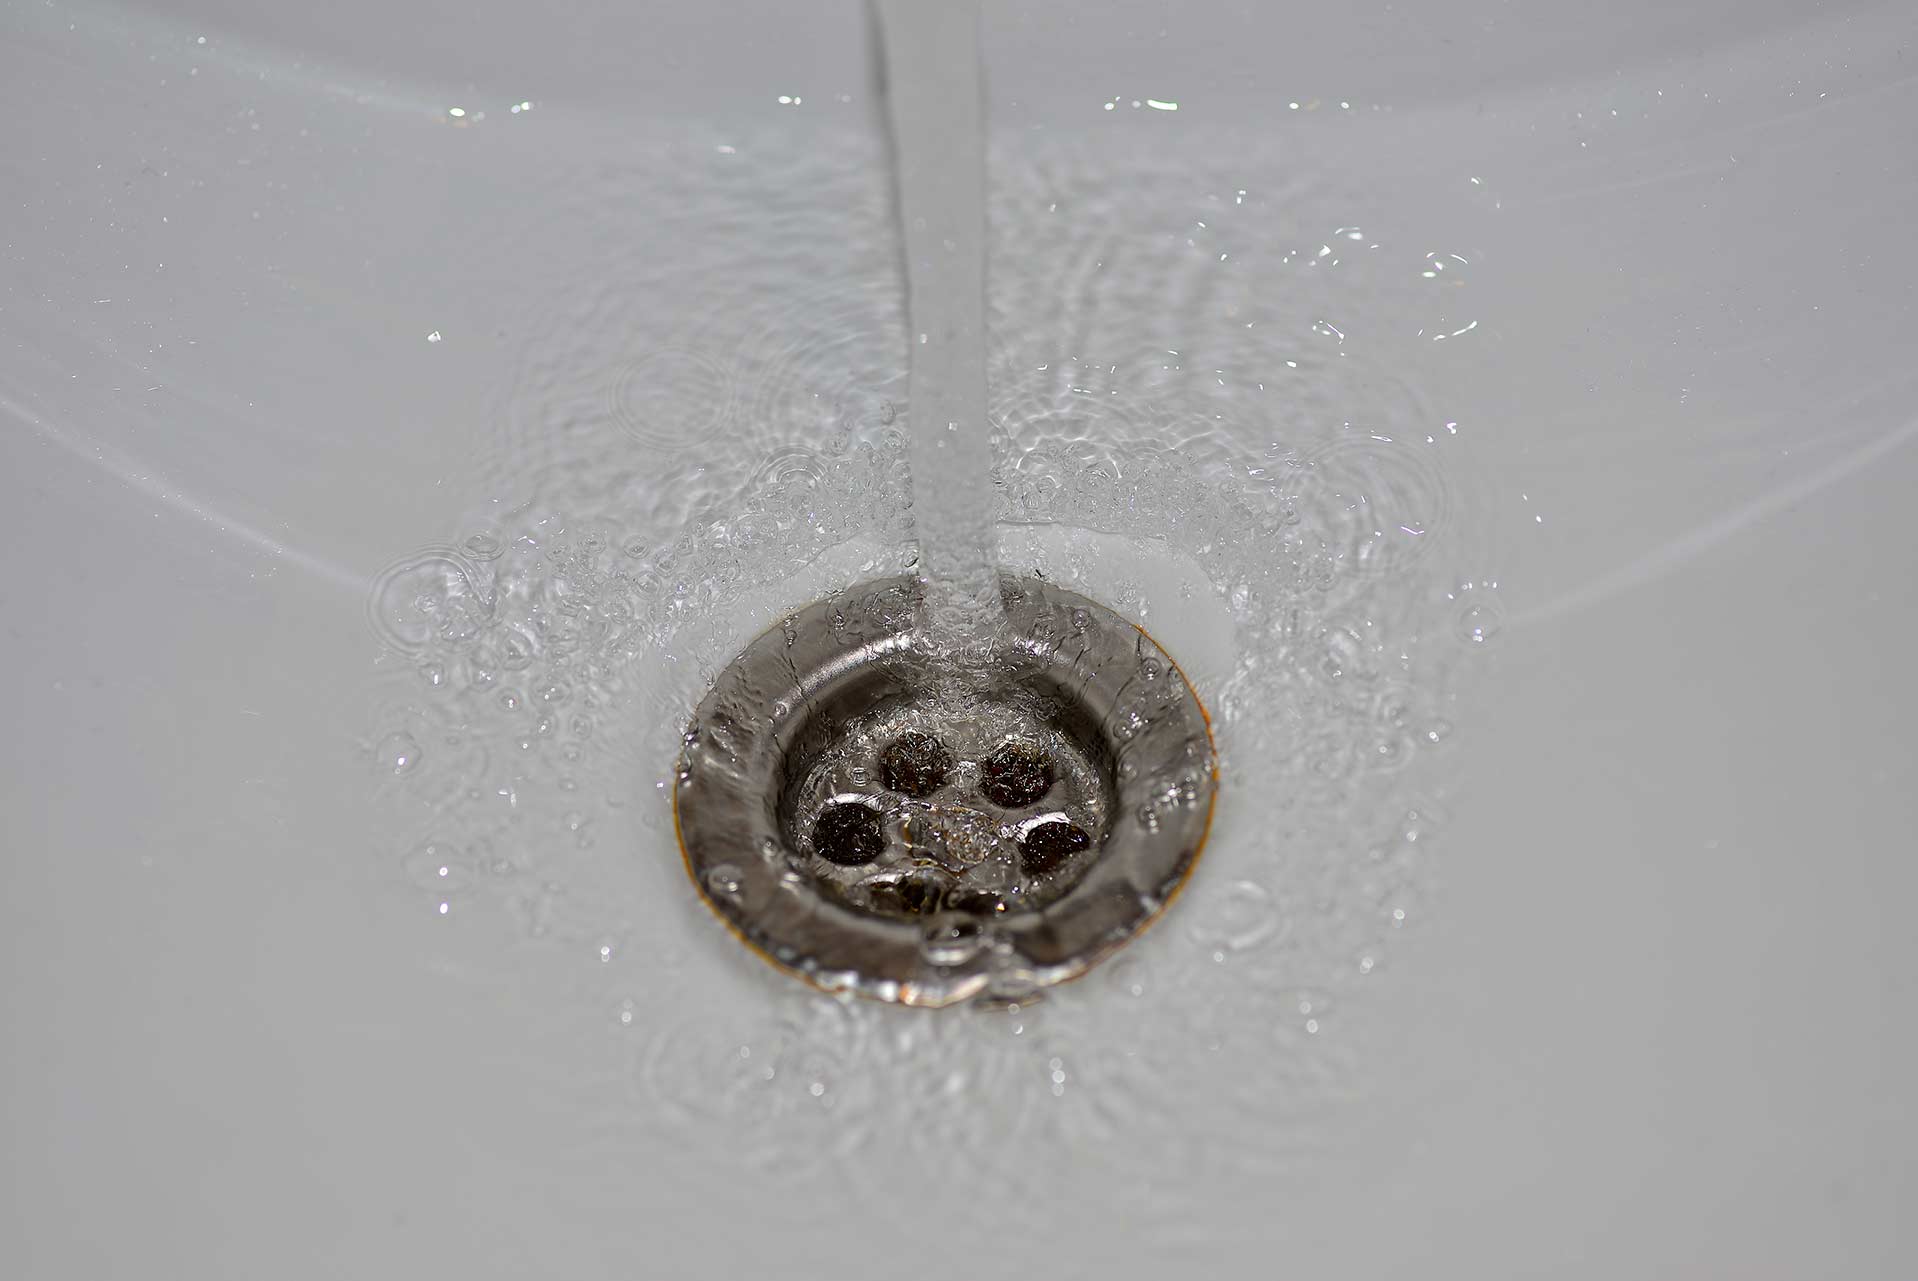 A2B Drains provides services to unblock blocked sinks and drains for properties in Welling.